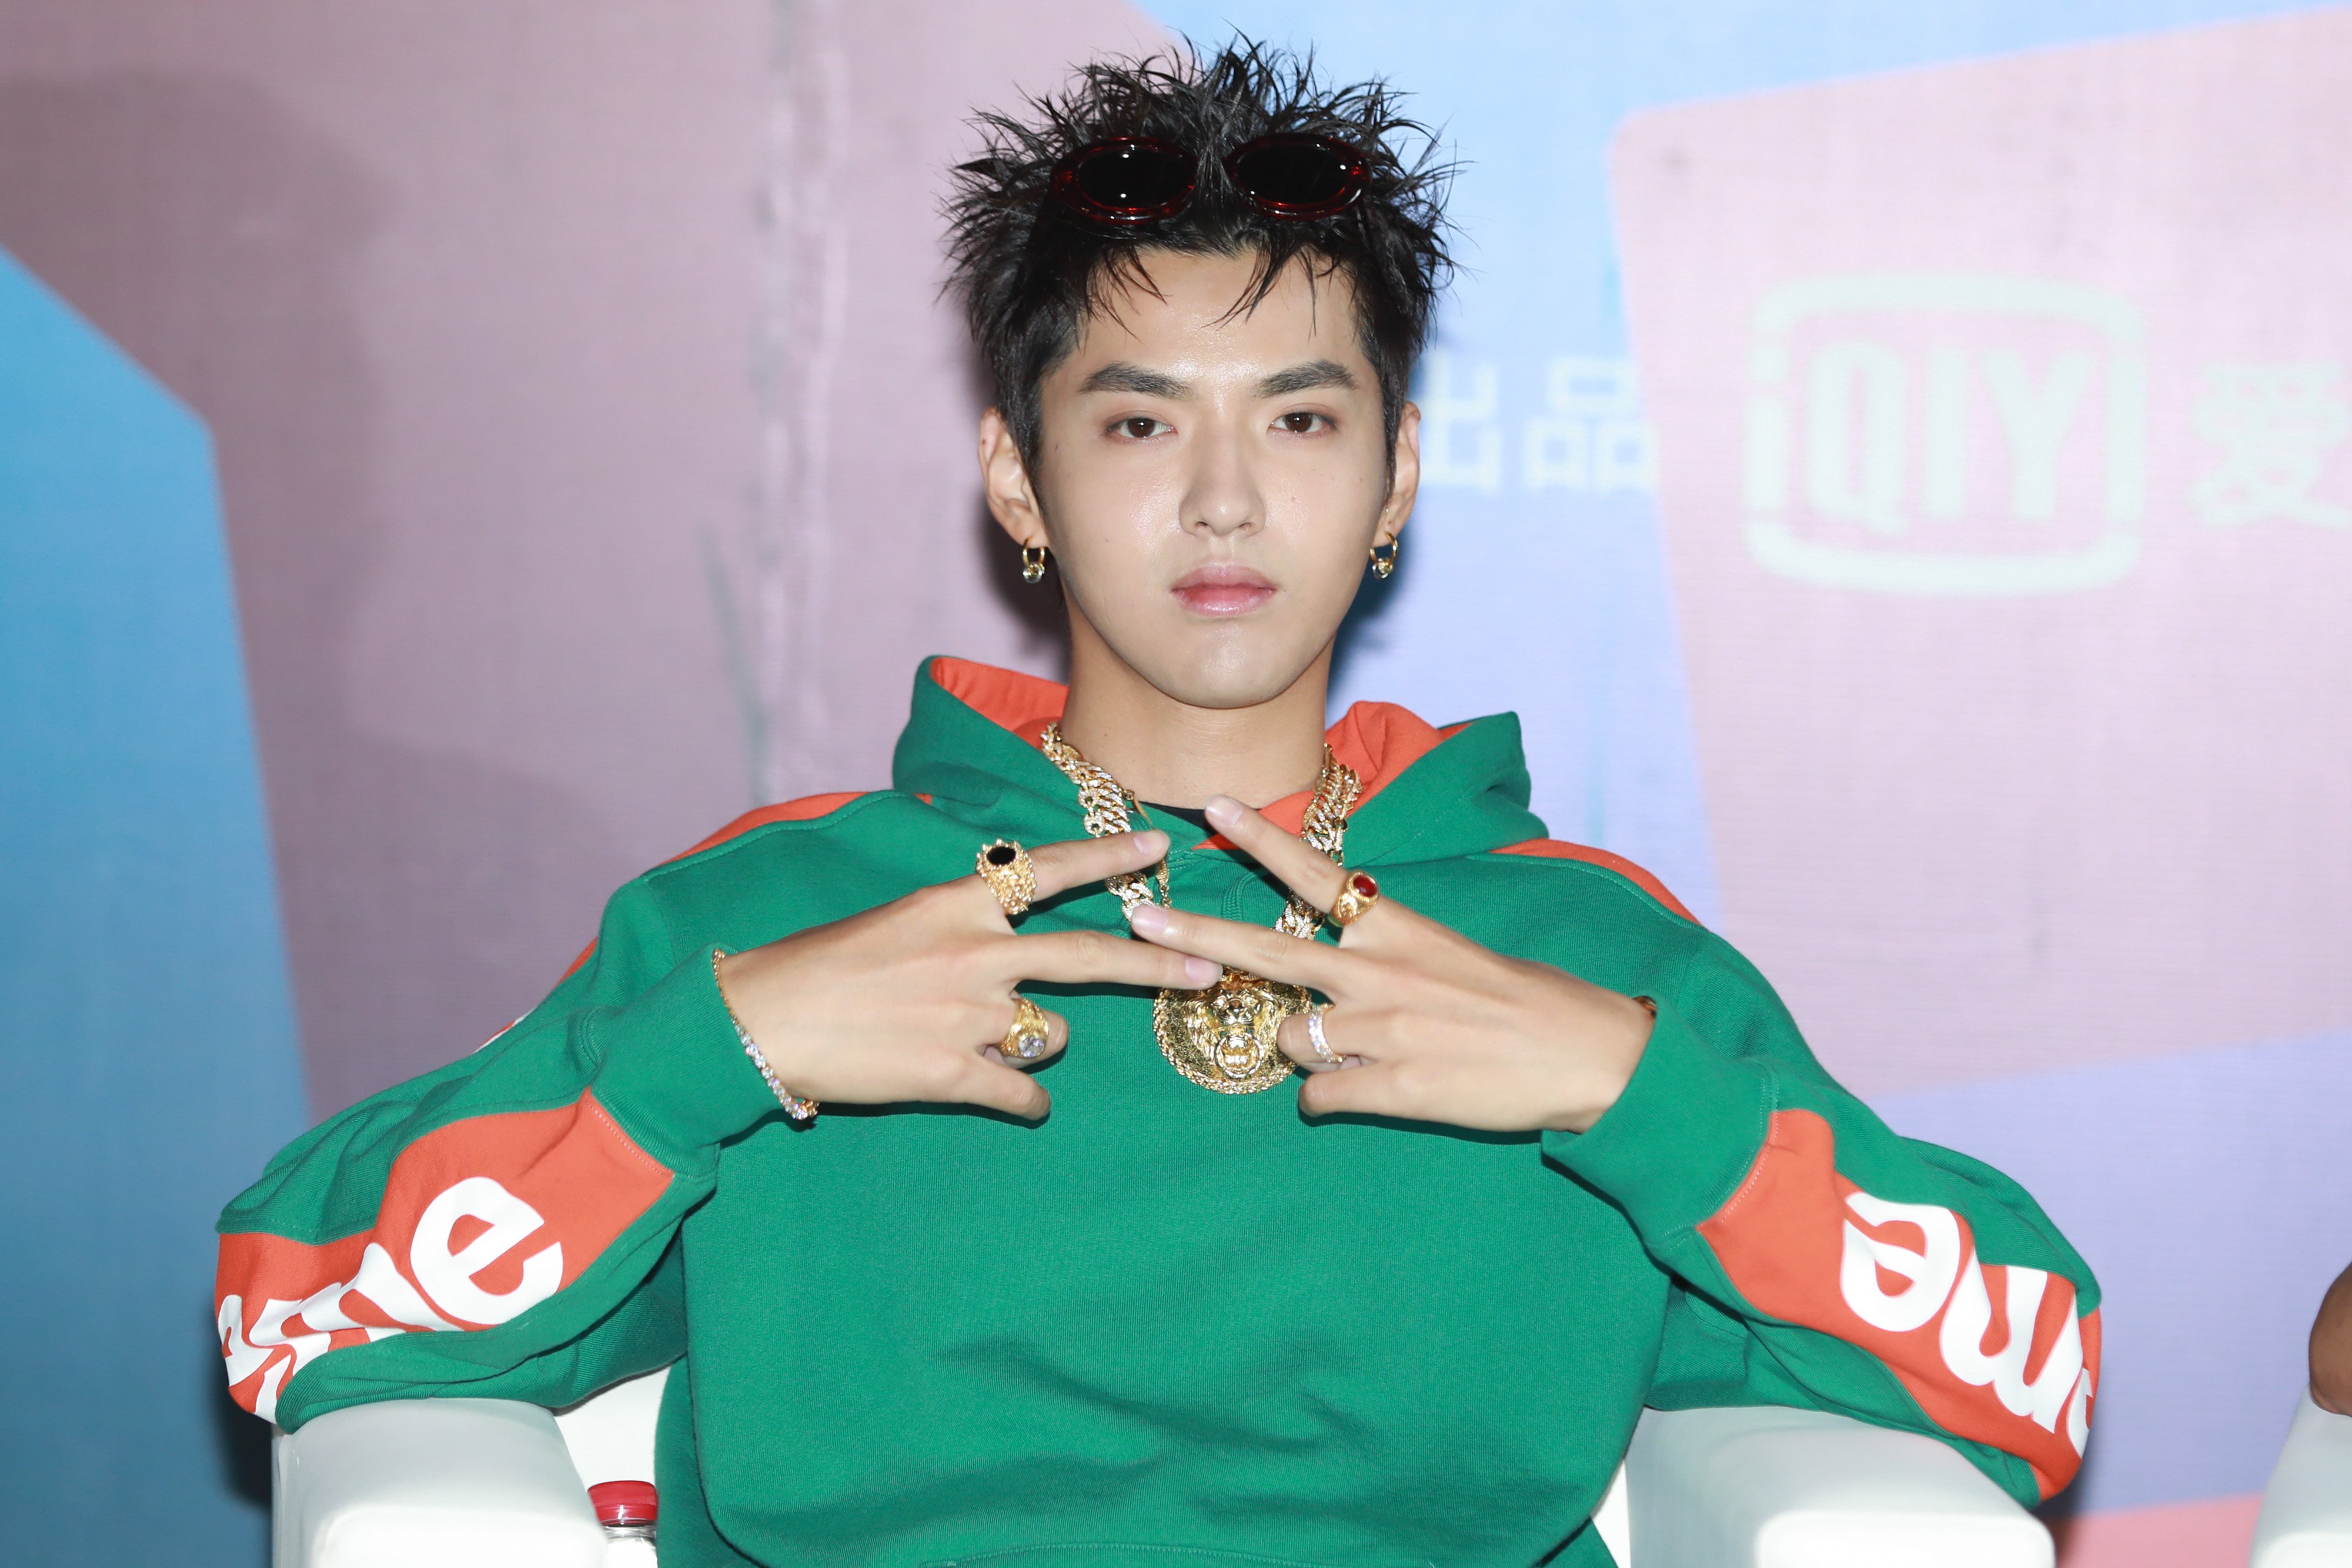 Chinese-Canadian pop star Kris Wu detained on suspicion of rape